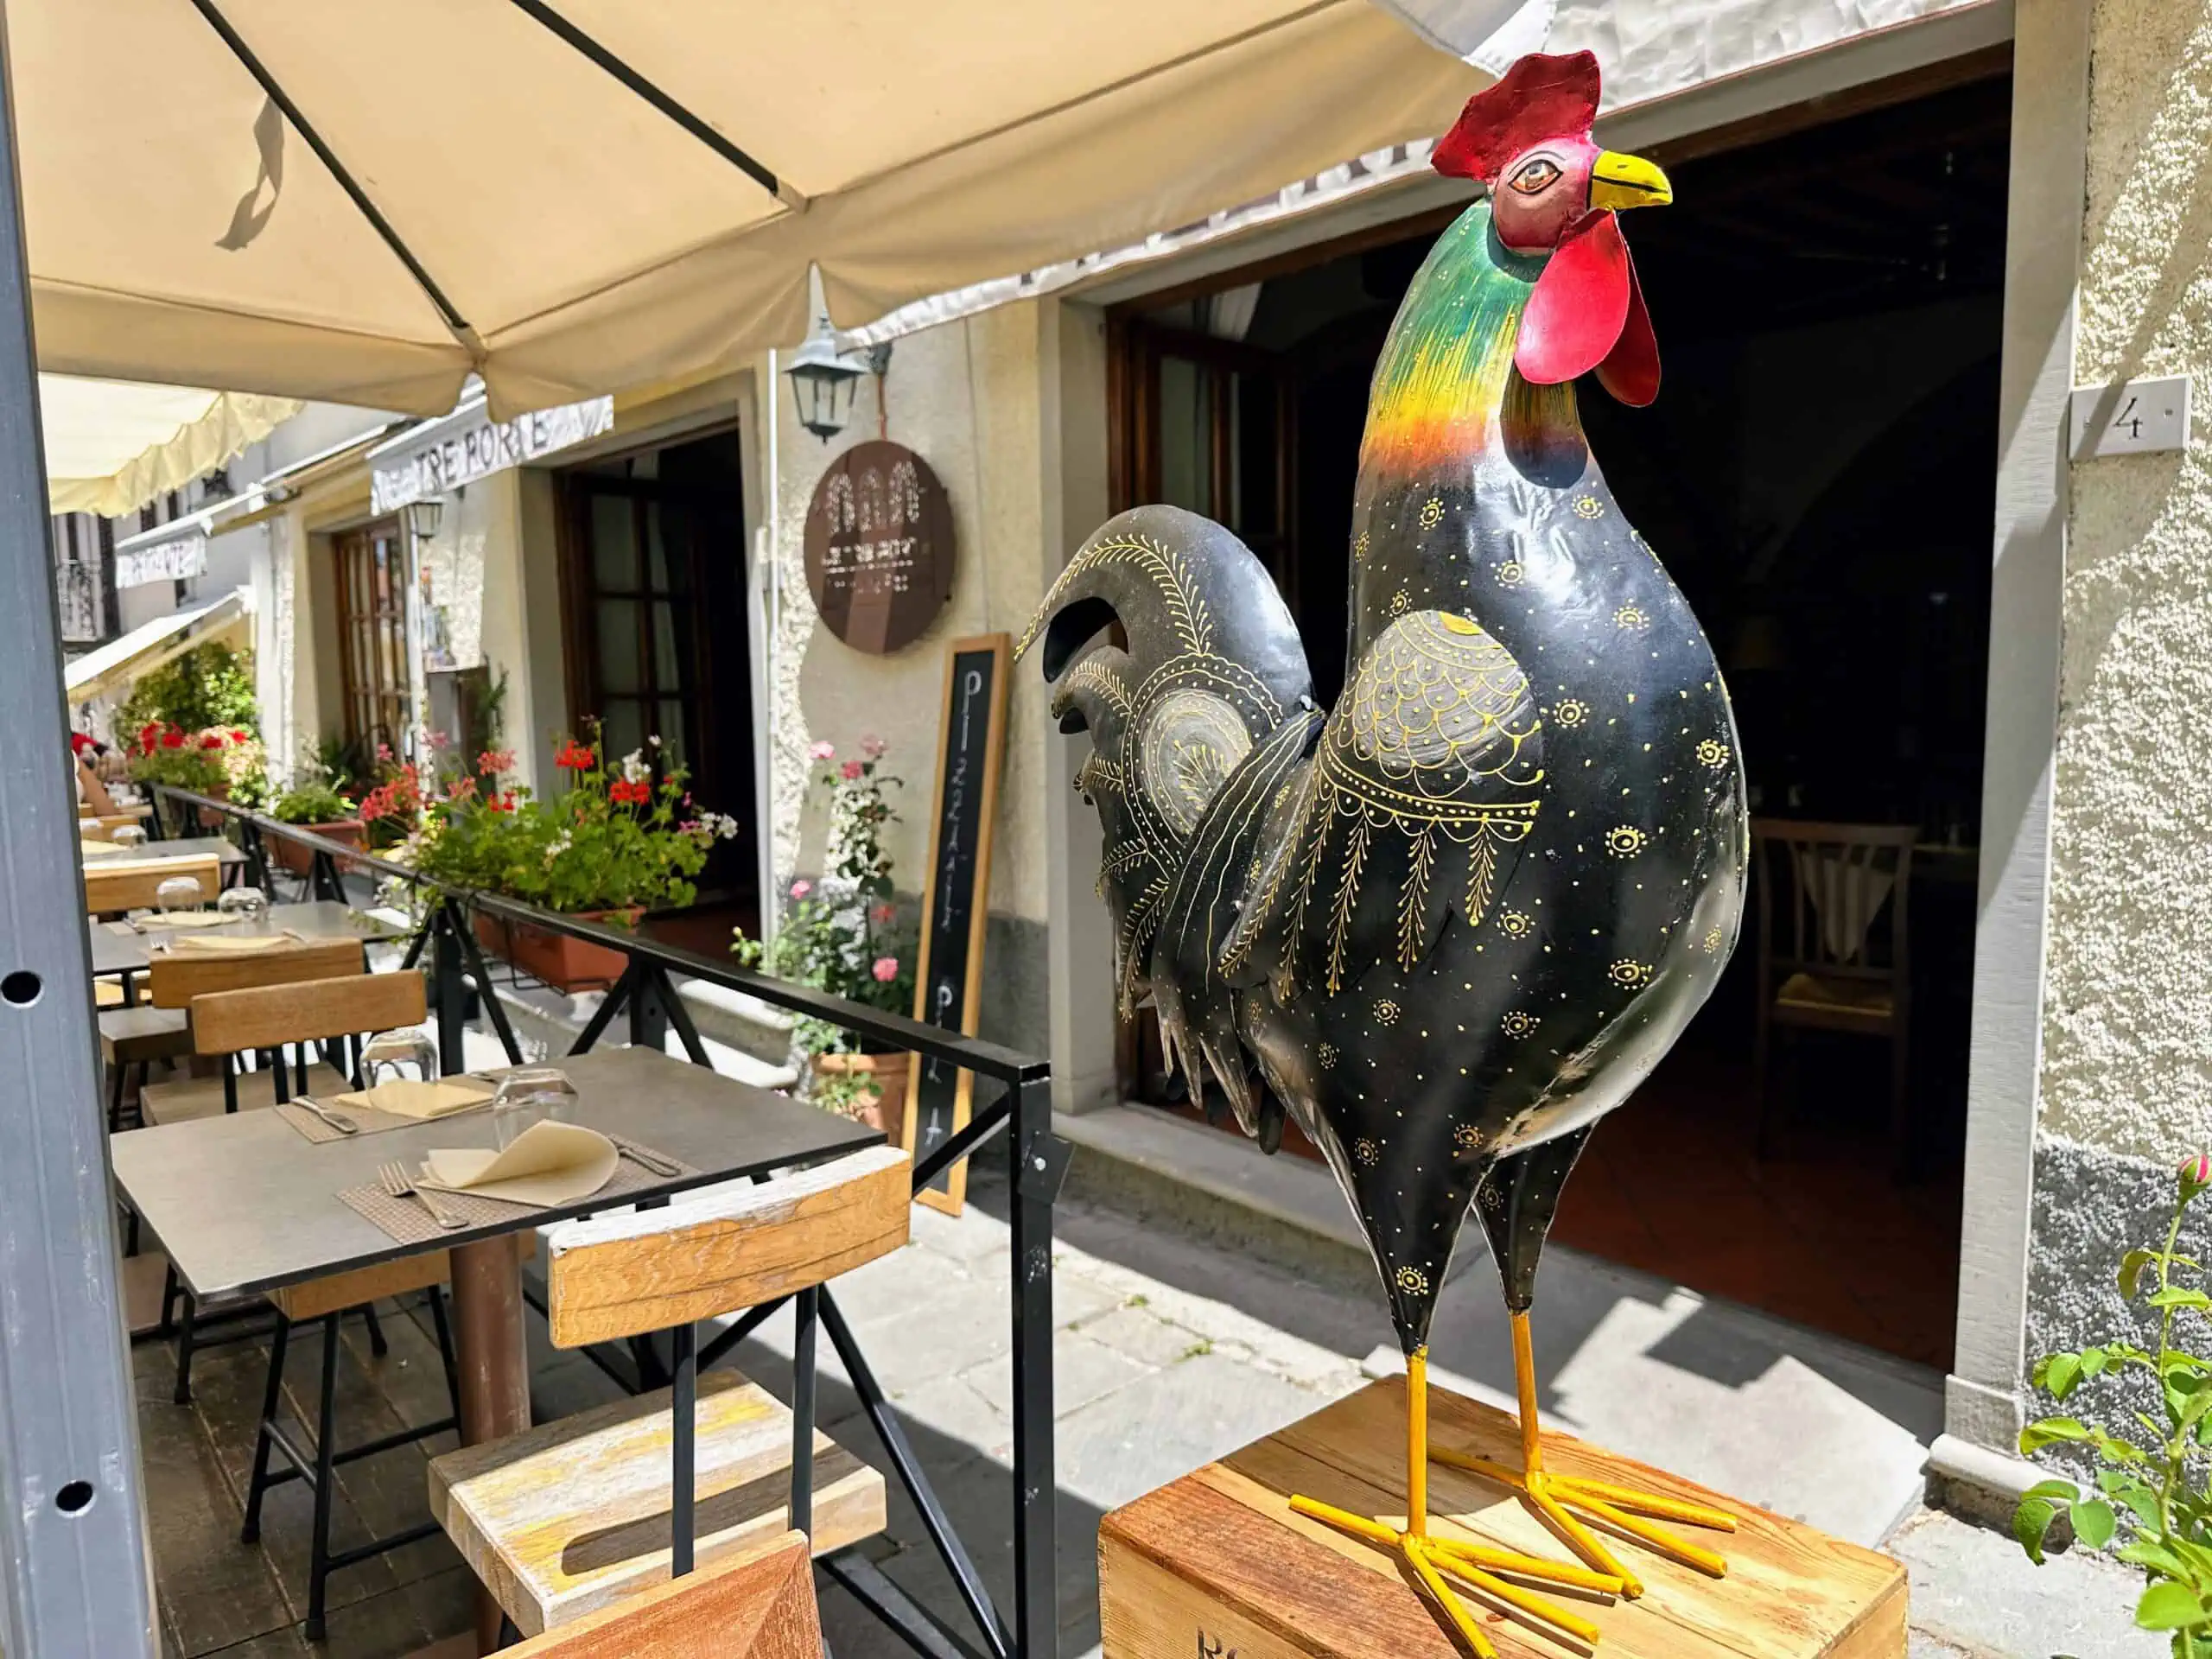 Rooster sculpture on display outside a restaurant in Italy.